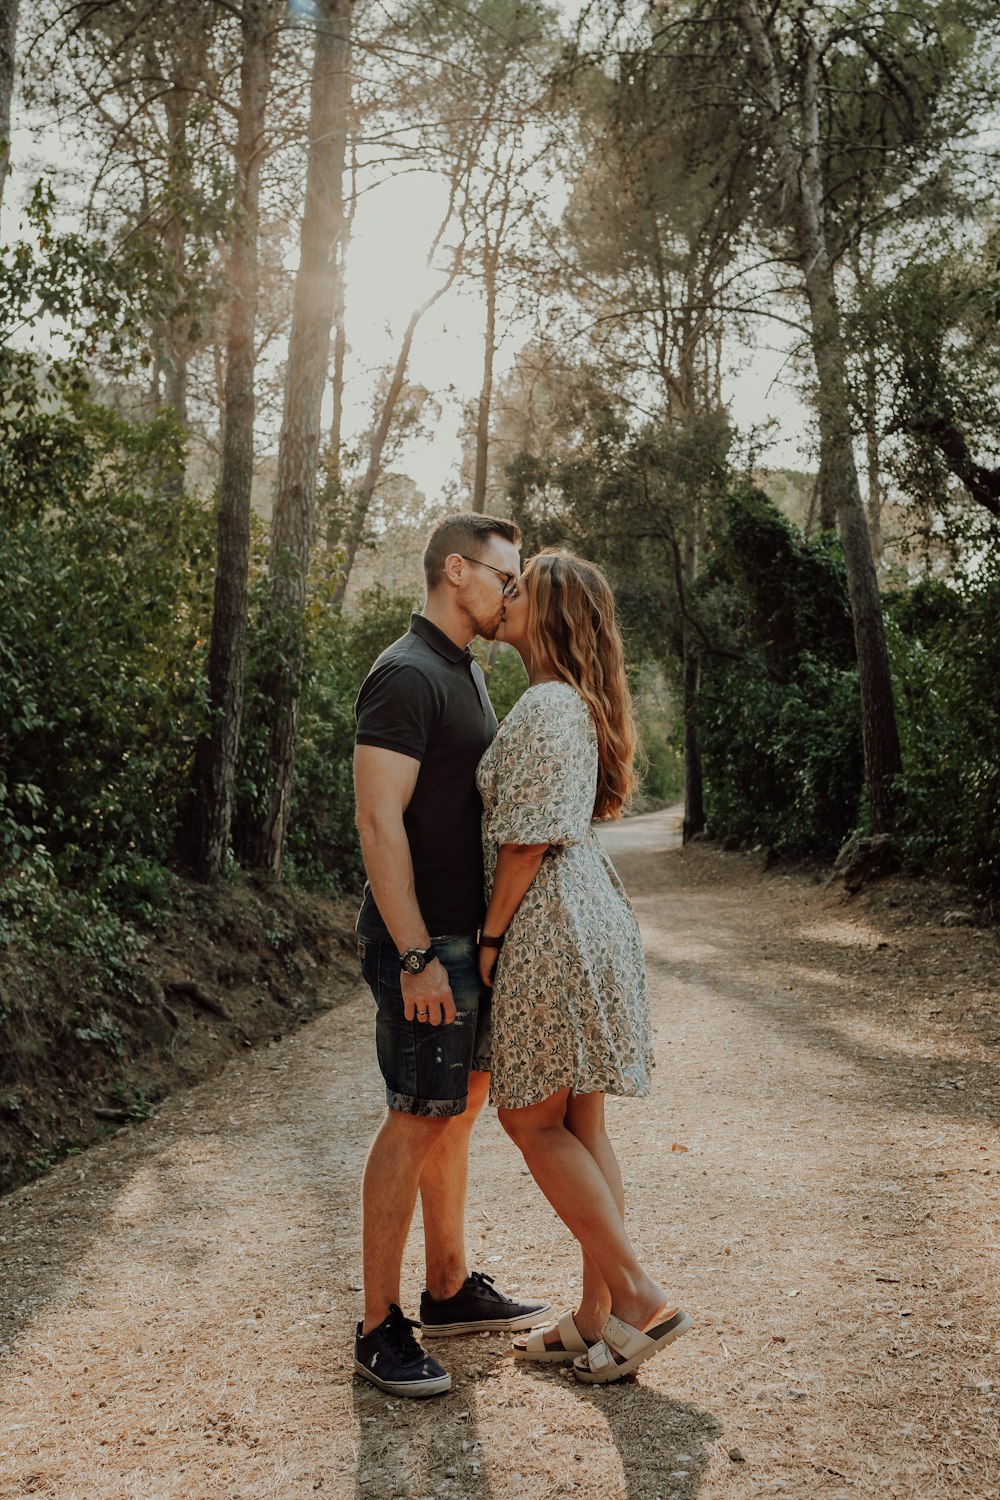 a man and woman kissing on a dirt path in the woods